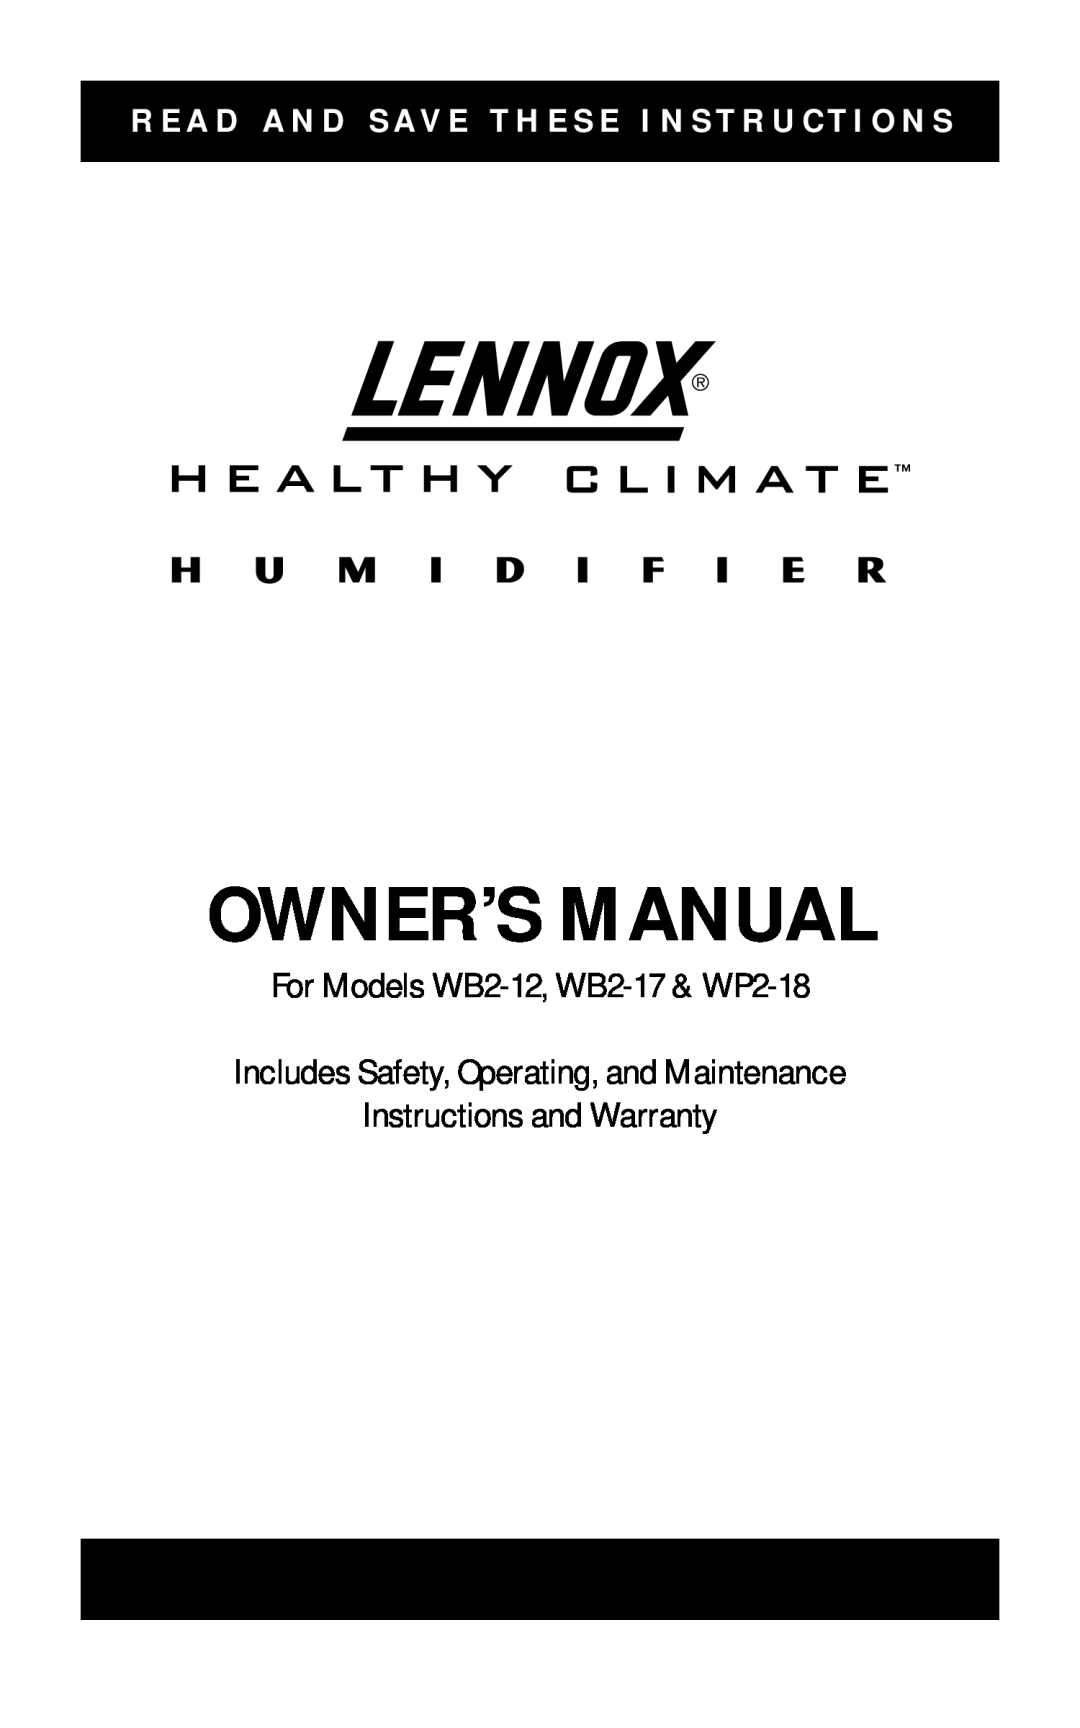 Lennox International Inc owner manual For Models WB2-12, WB2-17& WP2-18, Includes Safety, Operating, and Maintenance 